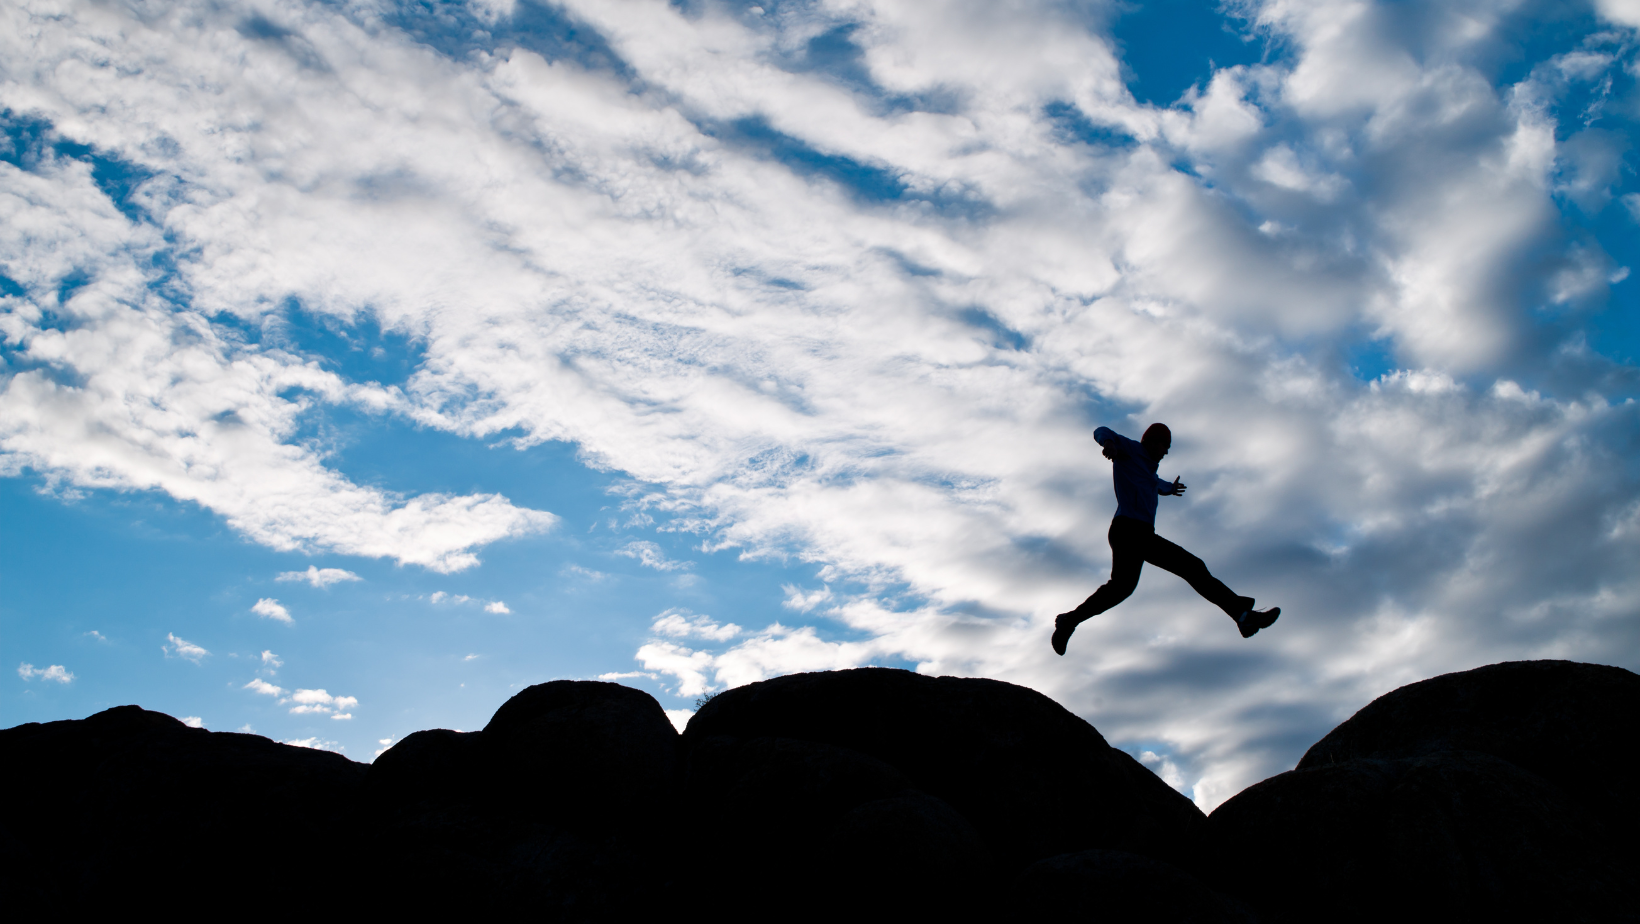 Silhouette of a person jumping across hilltops